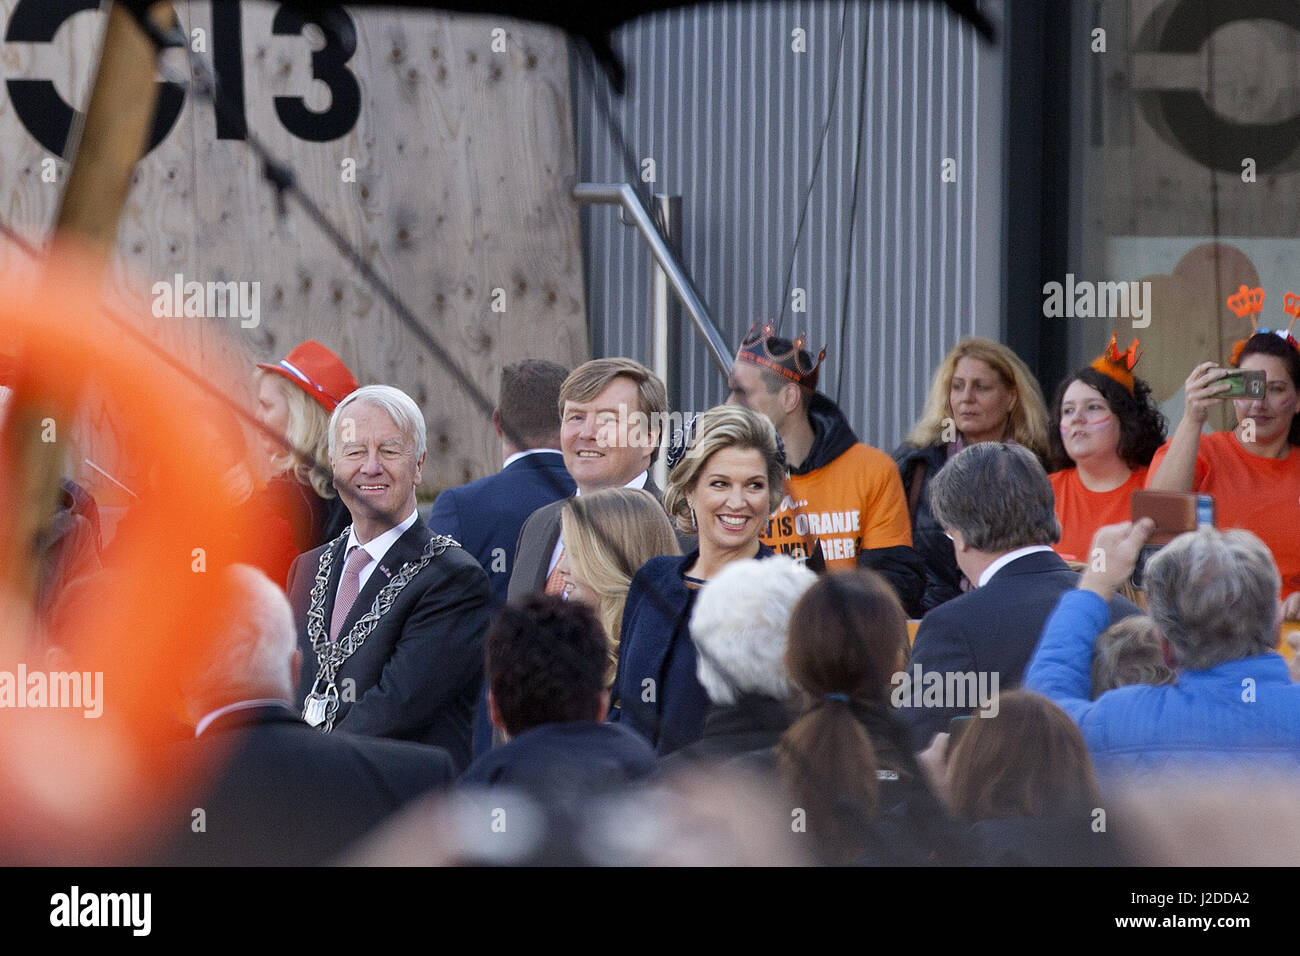 April 27, 2017 - Tilburg, Noord-Brabant, Netherlands - Tilburg, the Netherlands. Kingsday 2017 in Holland . The royal family celebrates the 50th anniversary of King Willem-Alexander today in Tilburg. Present are: King Willem-Alexander, Queen MÃ¡xima and their three daughters Amalia, Ariane and Alexia. There are also Prince Constantijn, Prince Laurentien, Prince Maurits, Princess Marilene, Prince Bernard, Princess Annette, Prince Pieter-Kristiaan, Princess Anita, Prince Floris and Princess Aimée. Credit: Paulien Van De Loo/ZUMA Wire/Alamy Live News Stock Photo